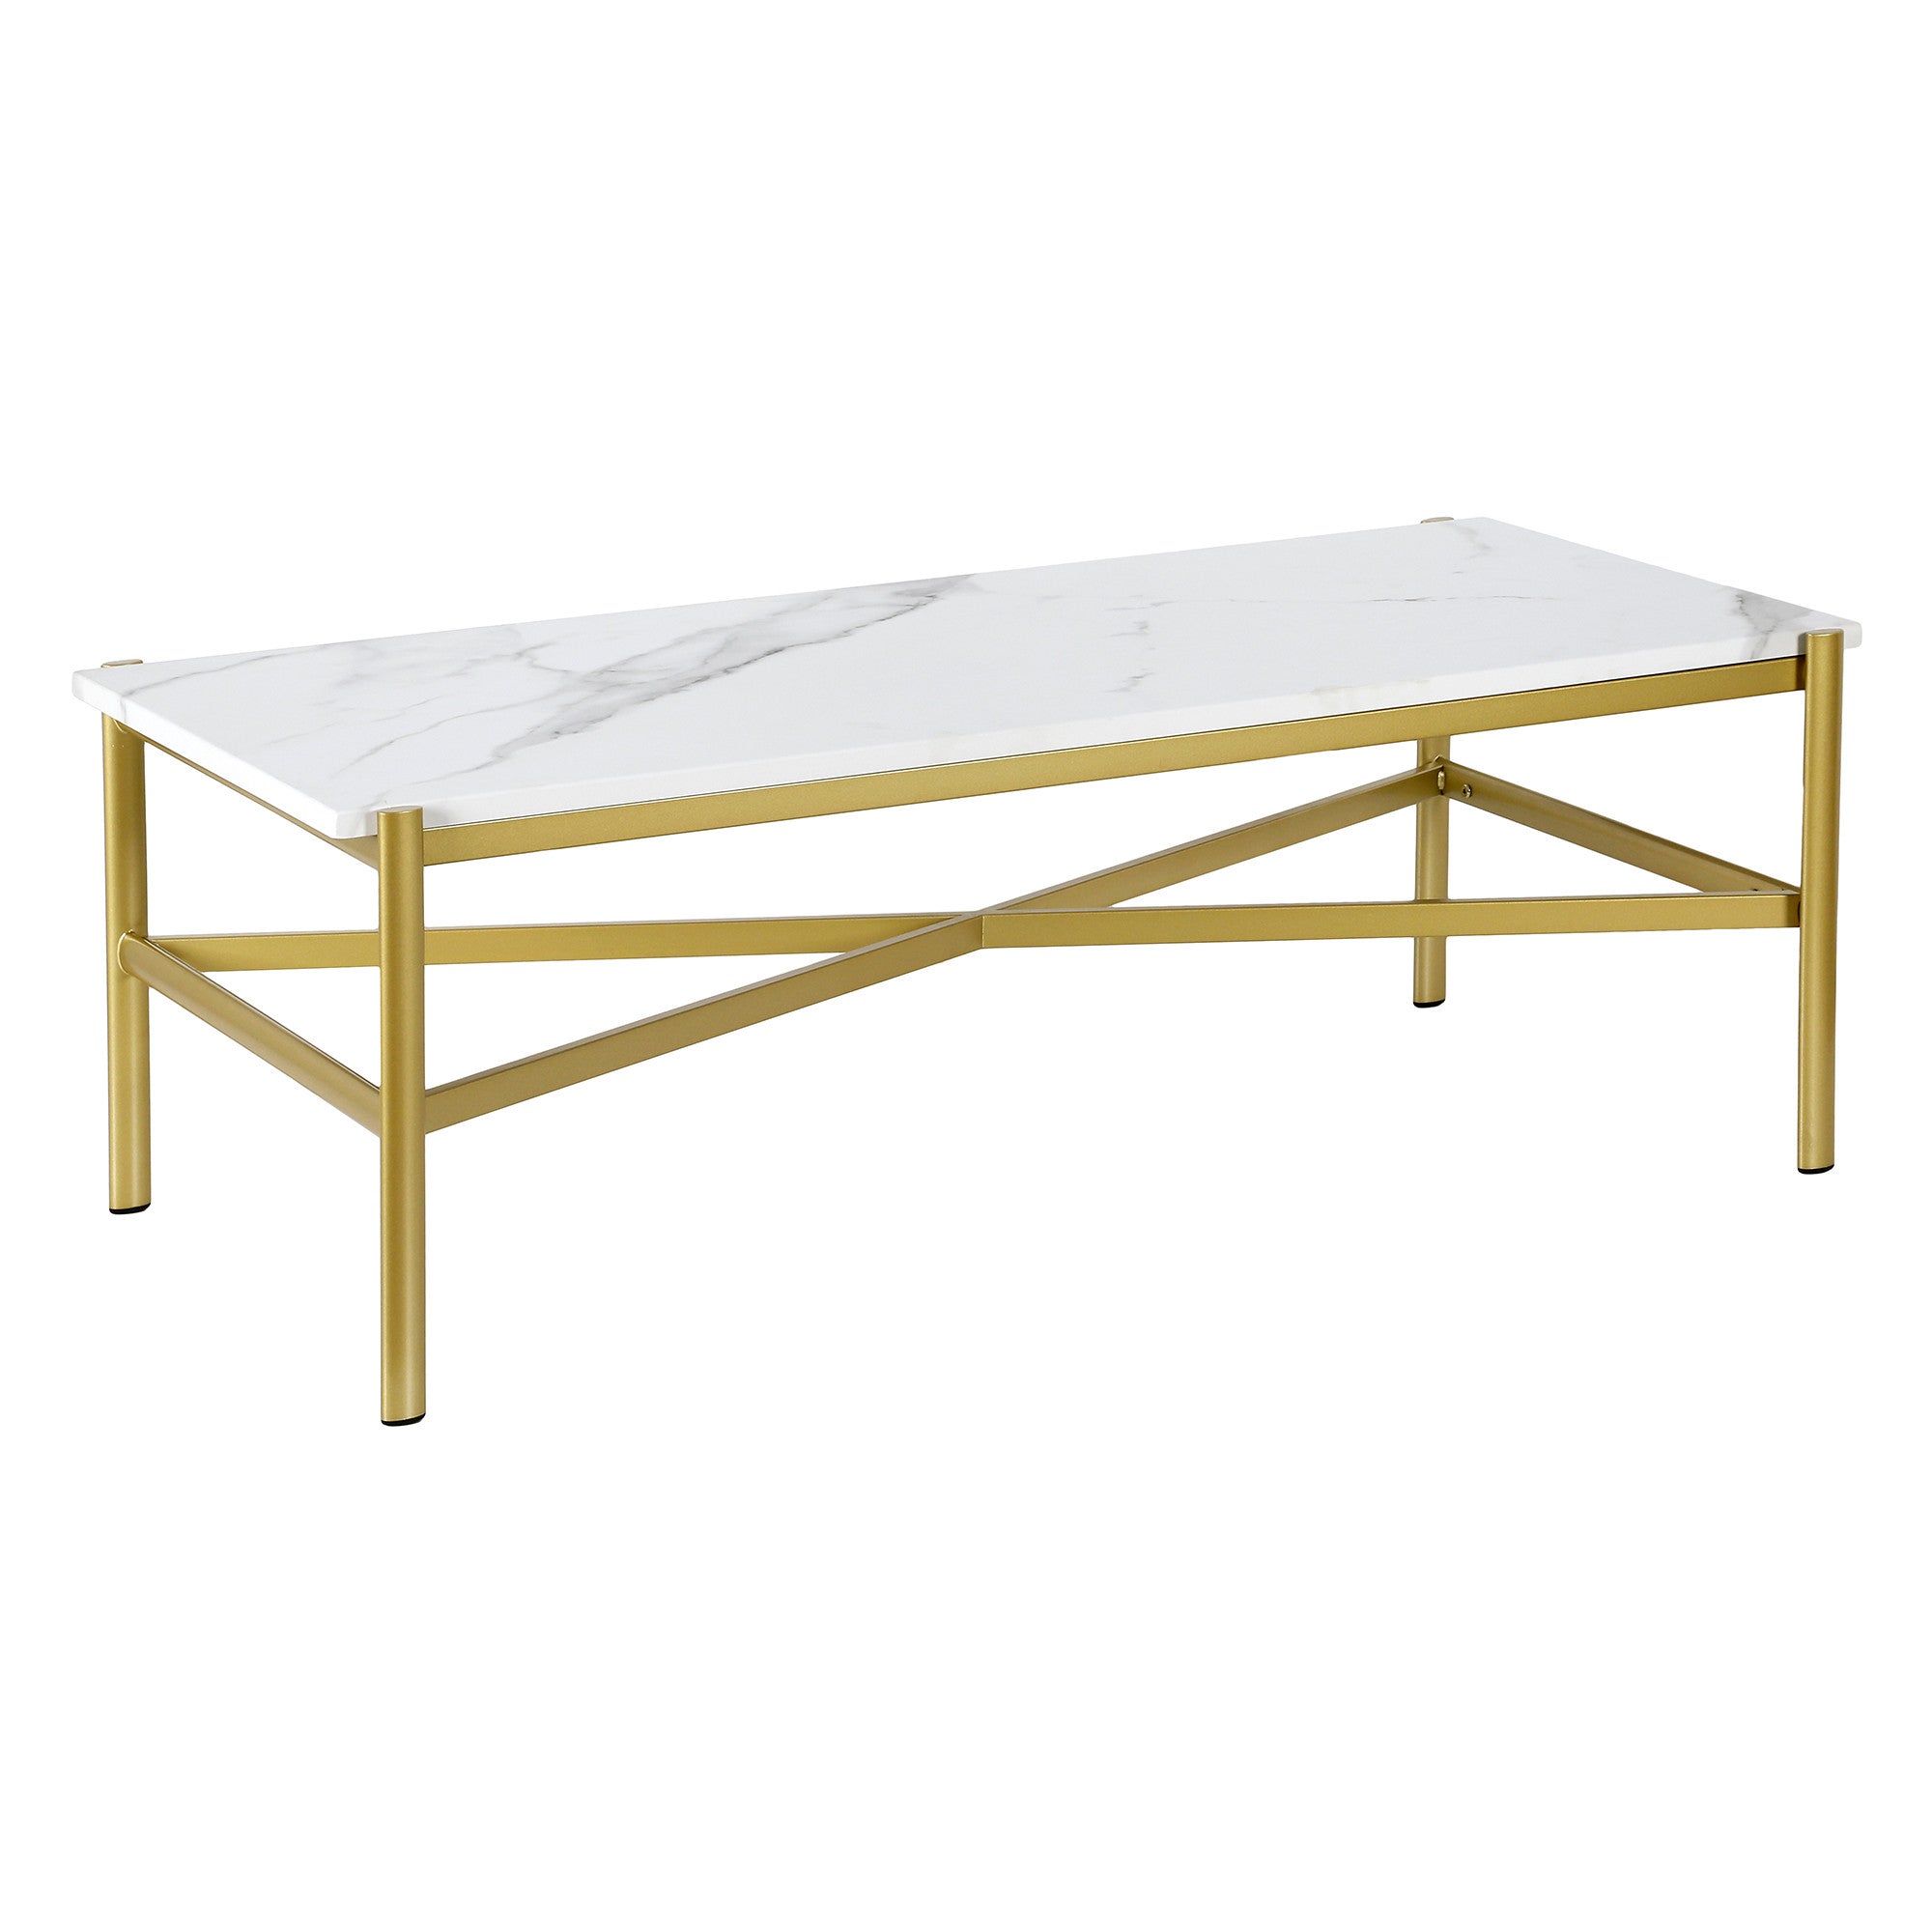 46" Gold Faux Marble And Steel Coffee Table